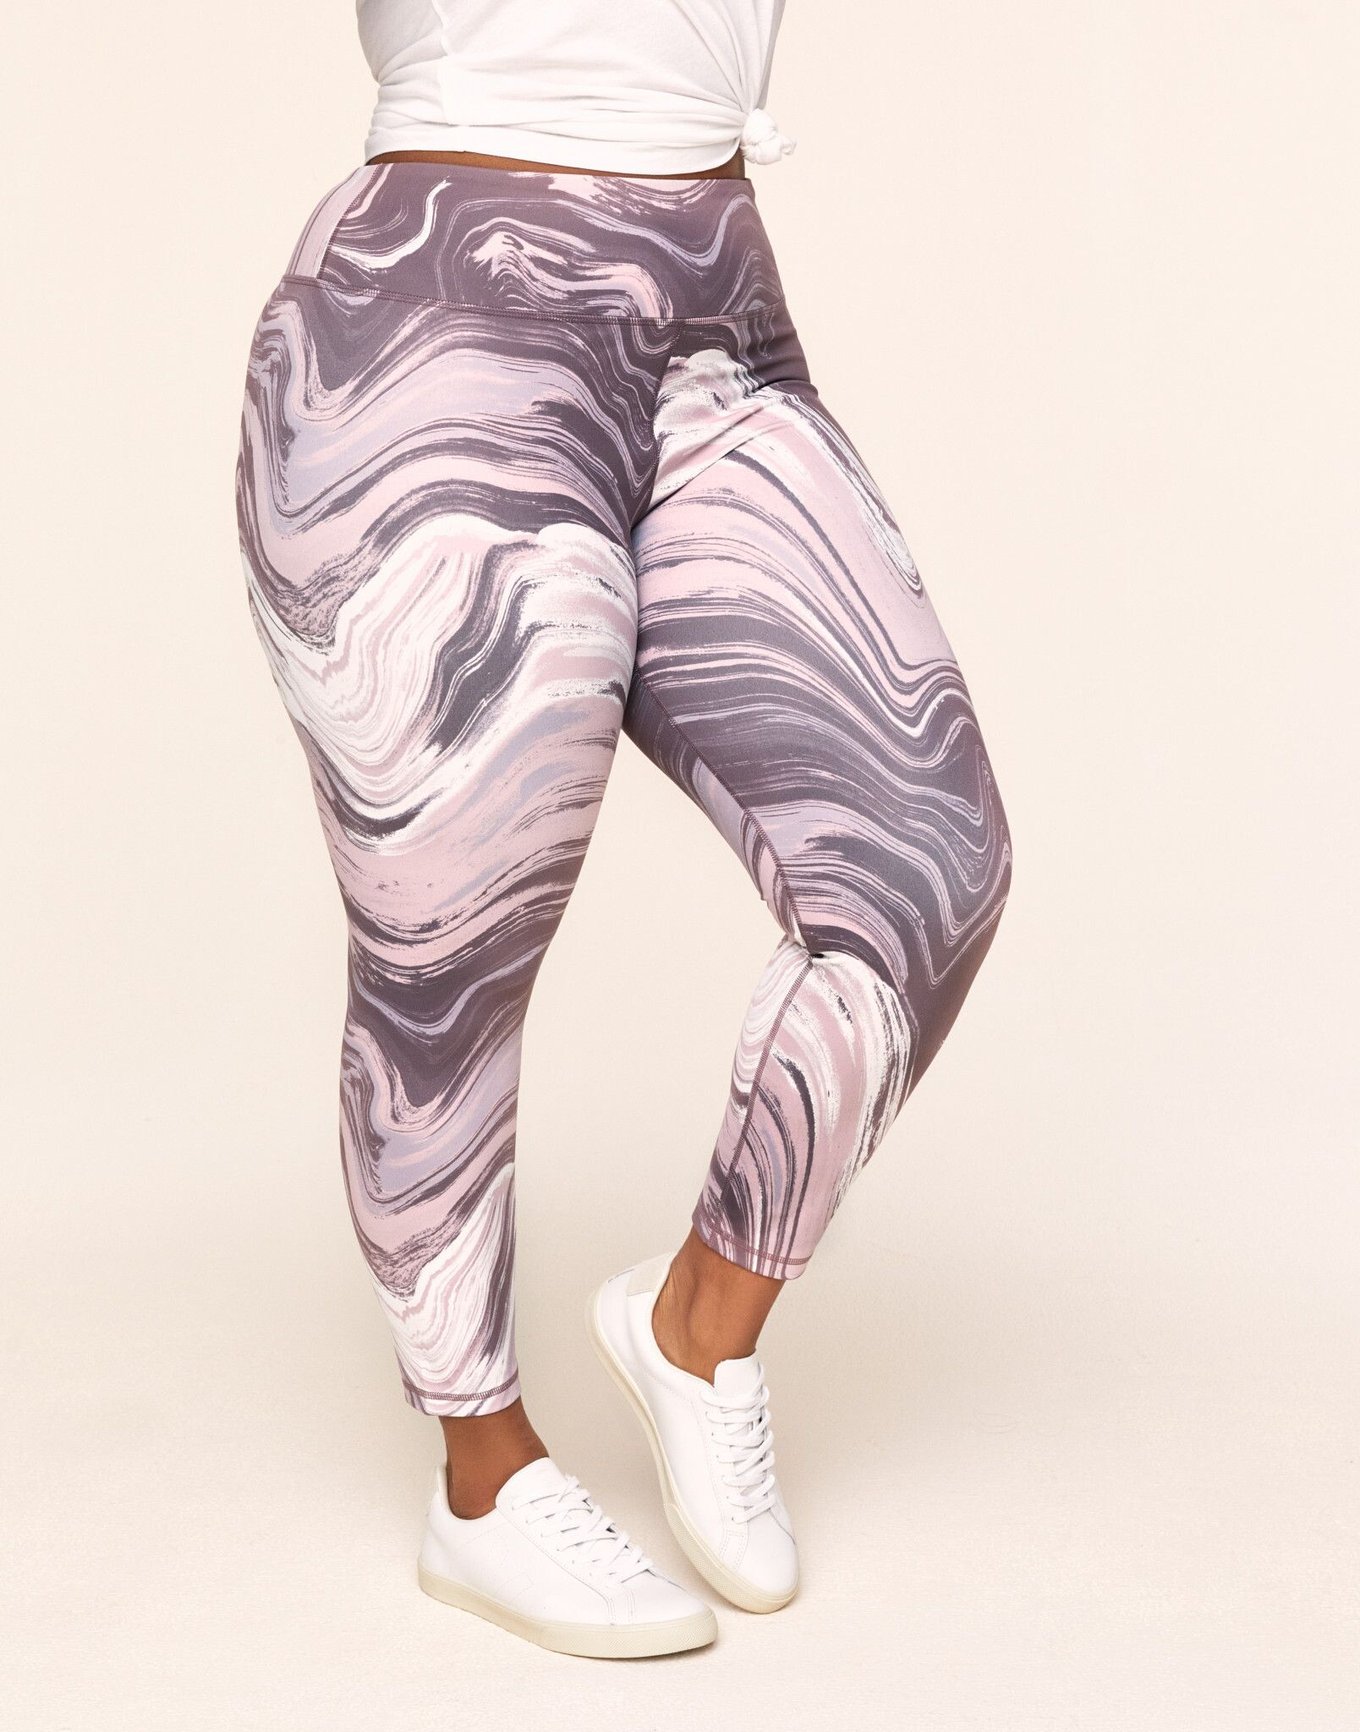 Crush Of The Season Lilac Cut Out And Push Up Legging Gym Set